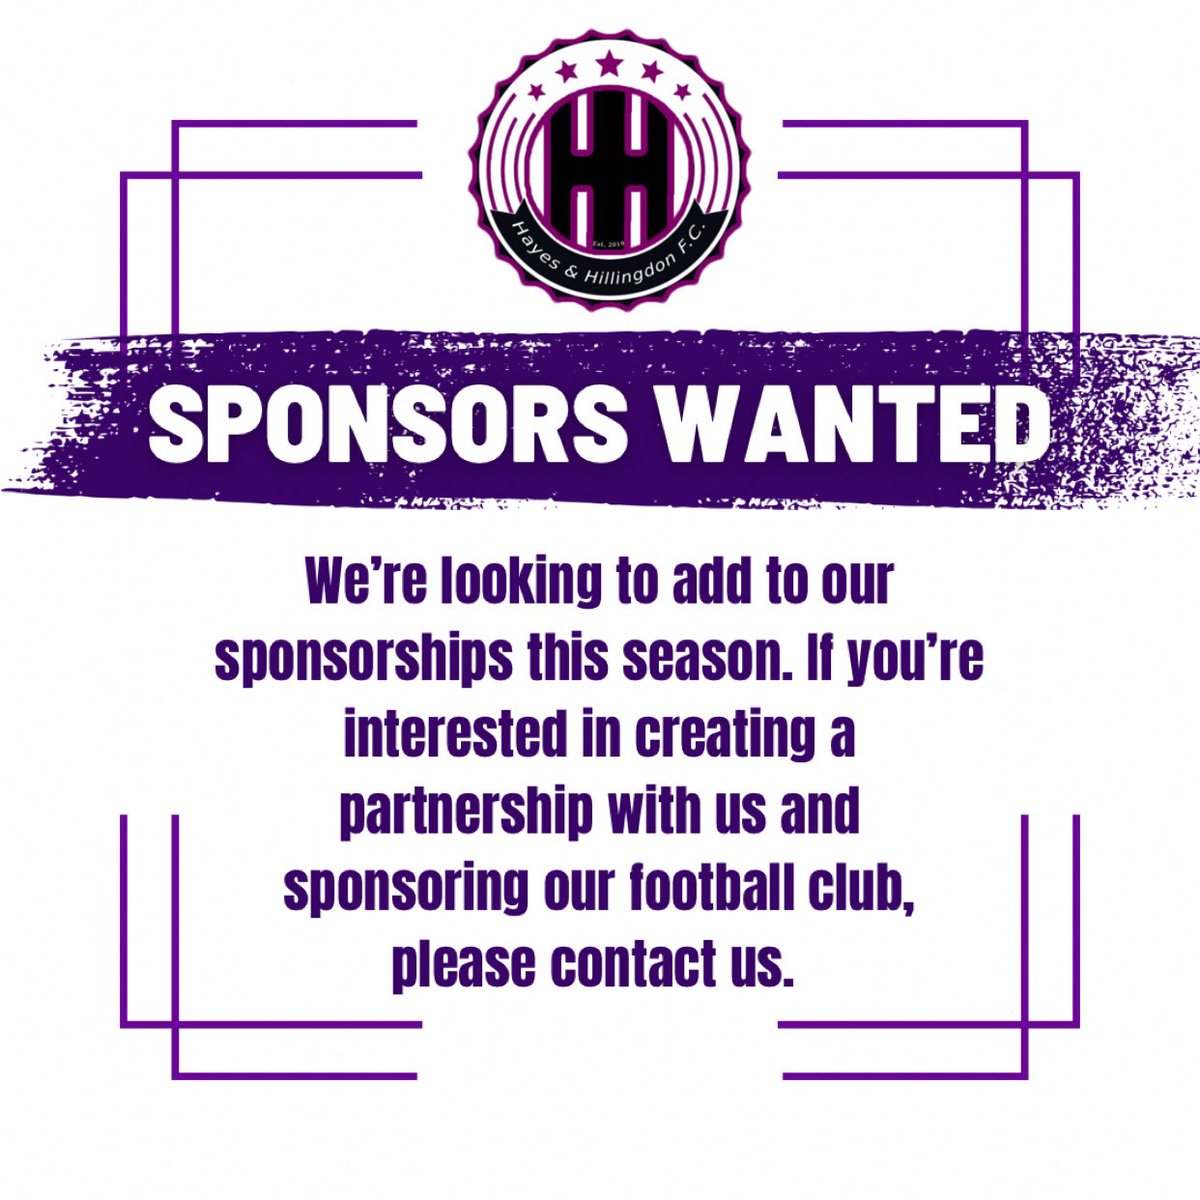 *SPONSORS WANTED* Please message us if you’re interested 👊🏼

@swirles_barbers @Southbournees @RichingsSports 

#HHFC #morethanafootballclub #hayesandhillingdonfc #hhfc #sponsors #sponsorsneeded #sponsorship #sponsorships 

💜🖤